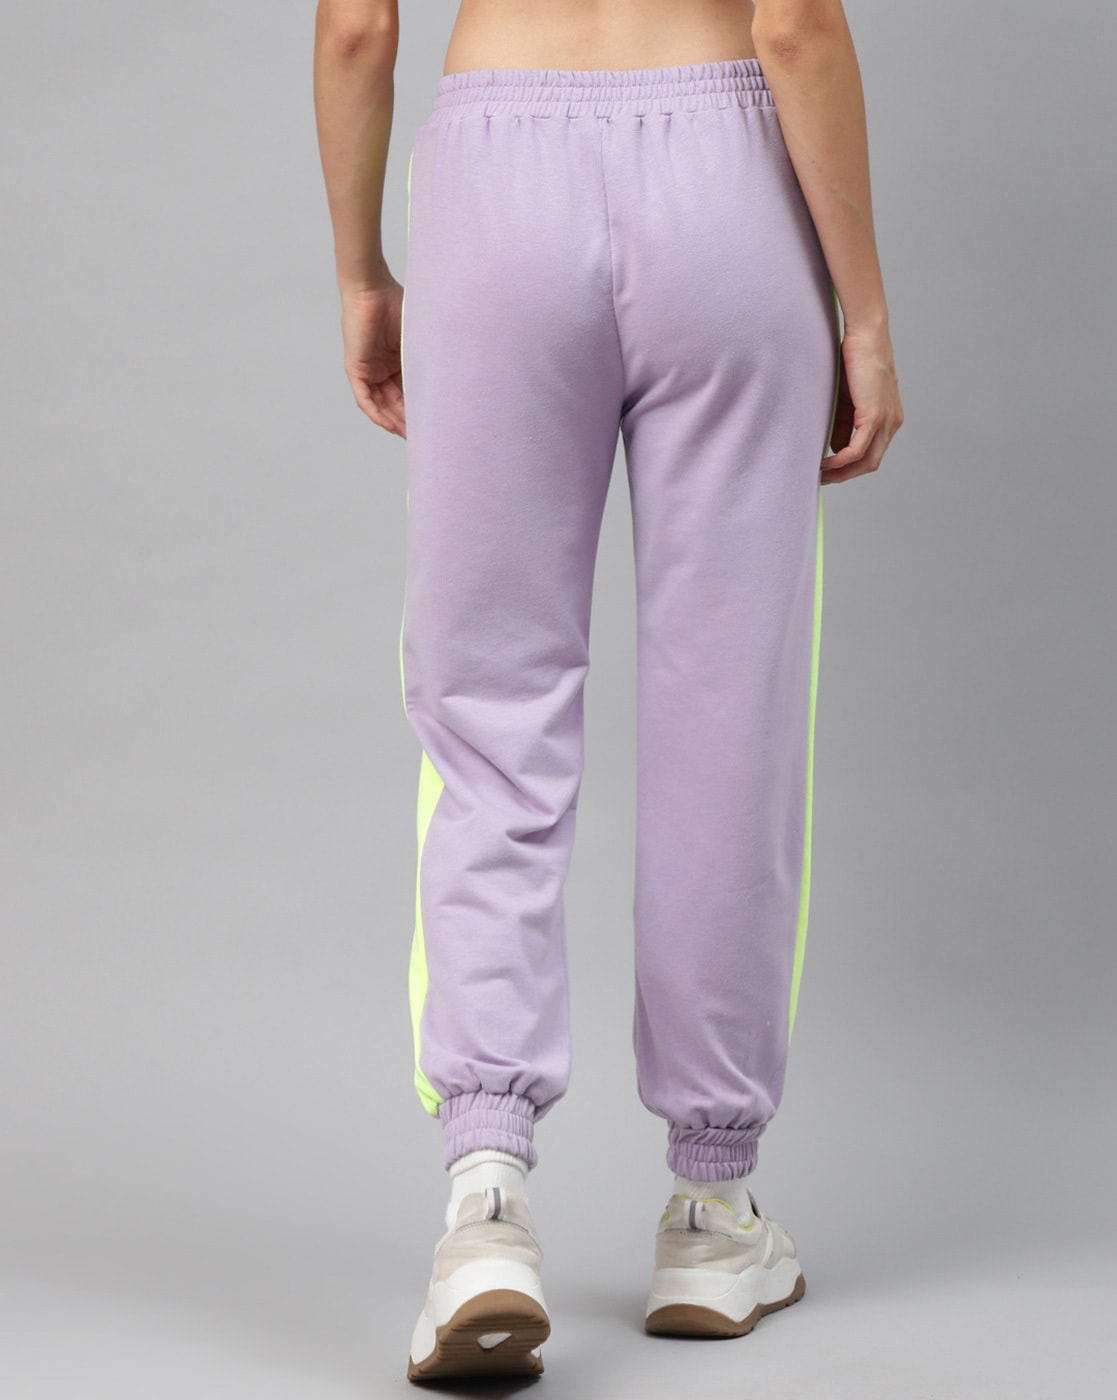 Relaxed Fit Fast-drying track pants - Plum purple - Men | H&M IN